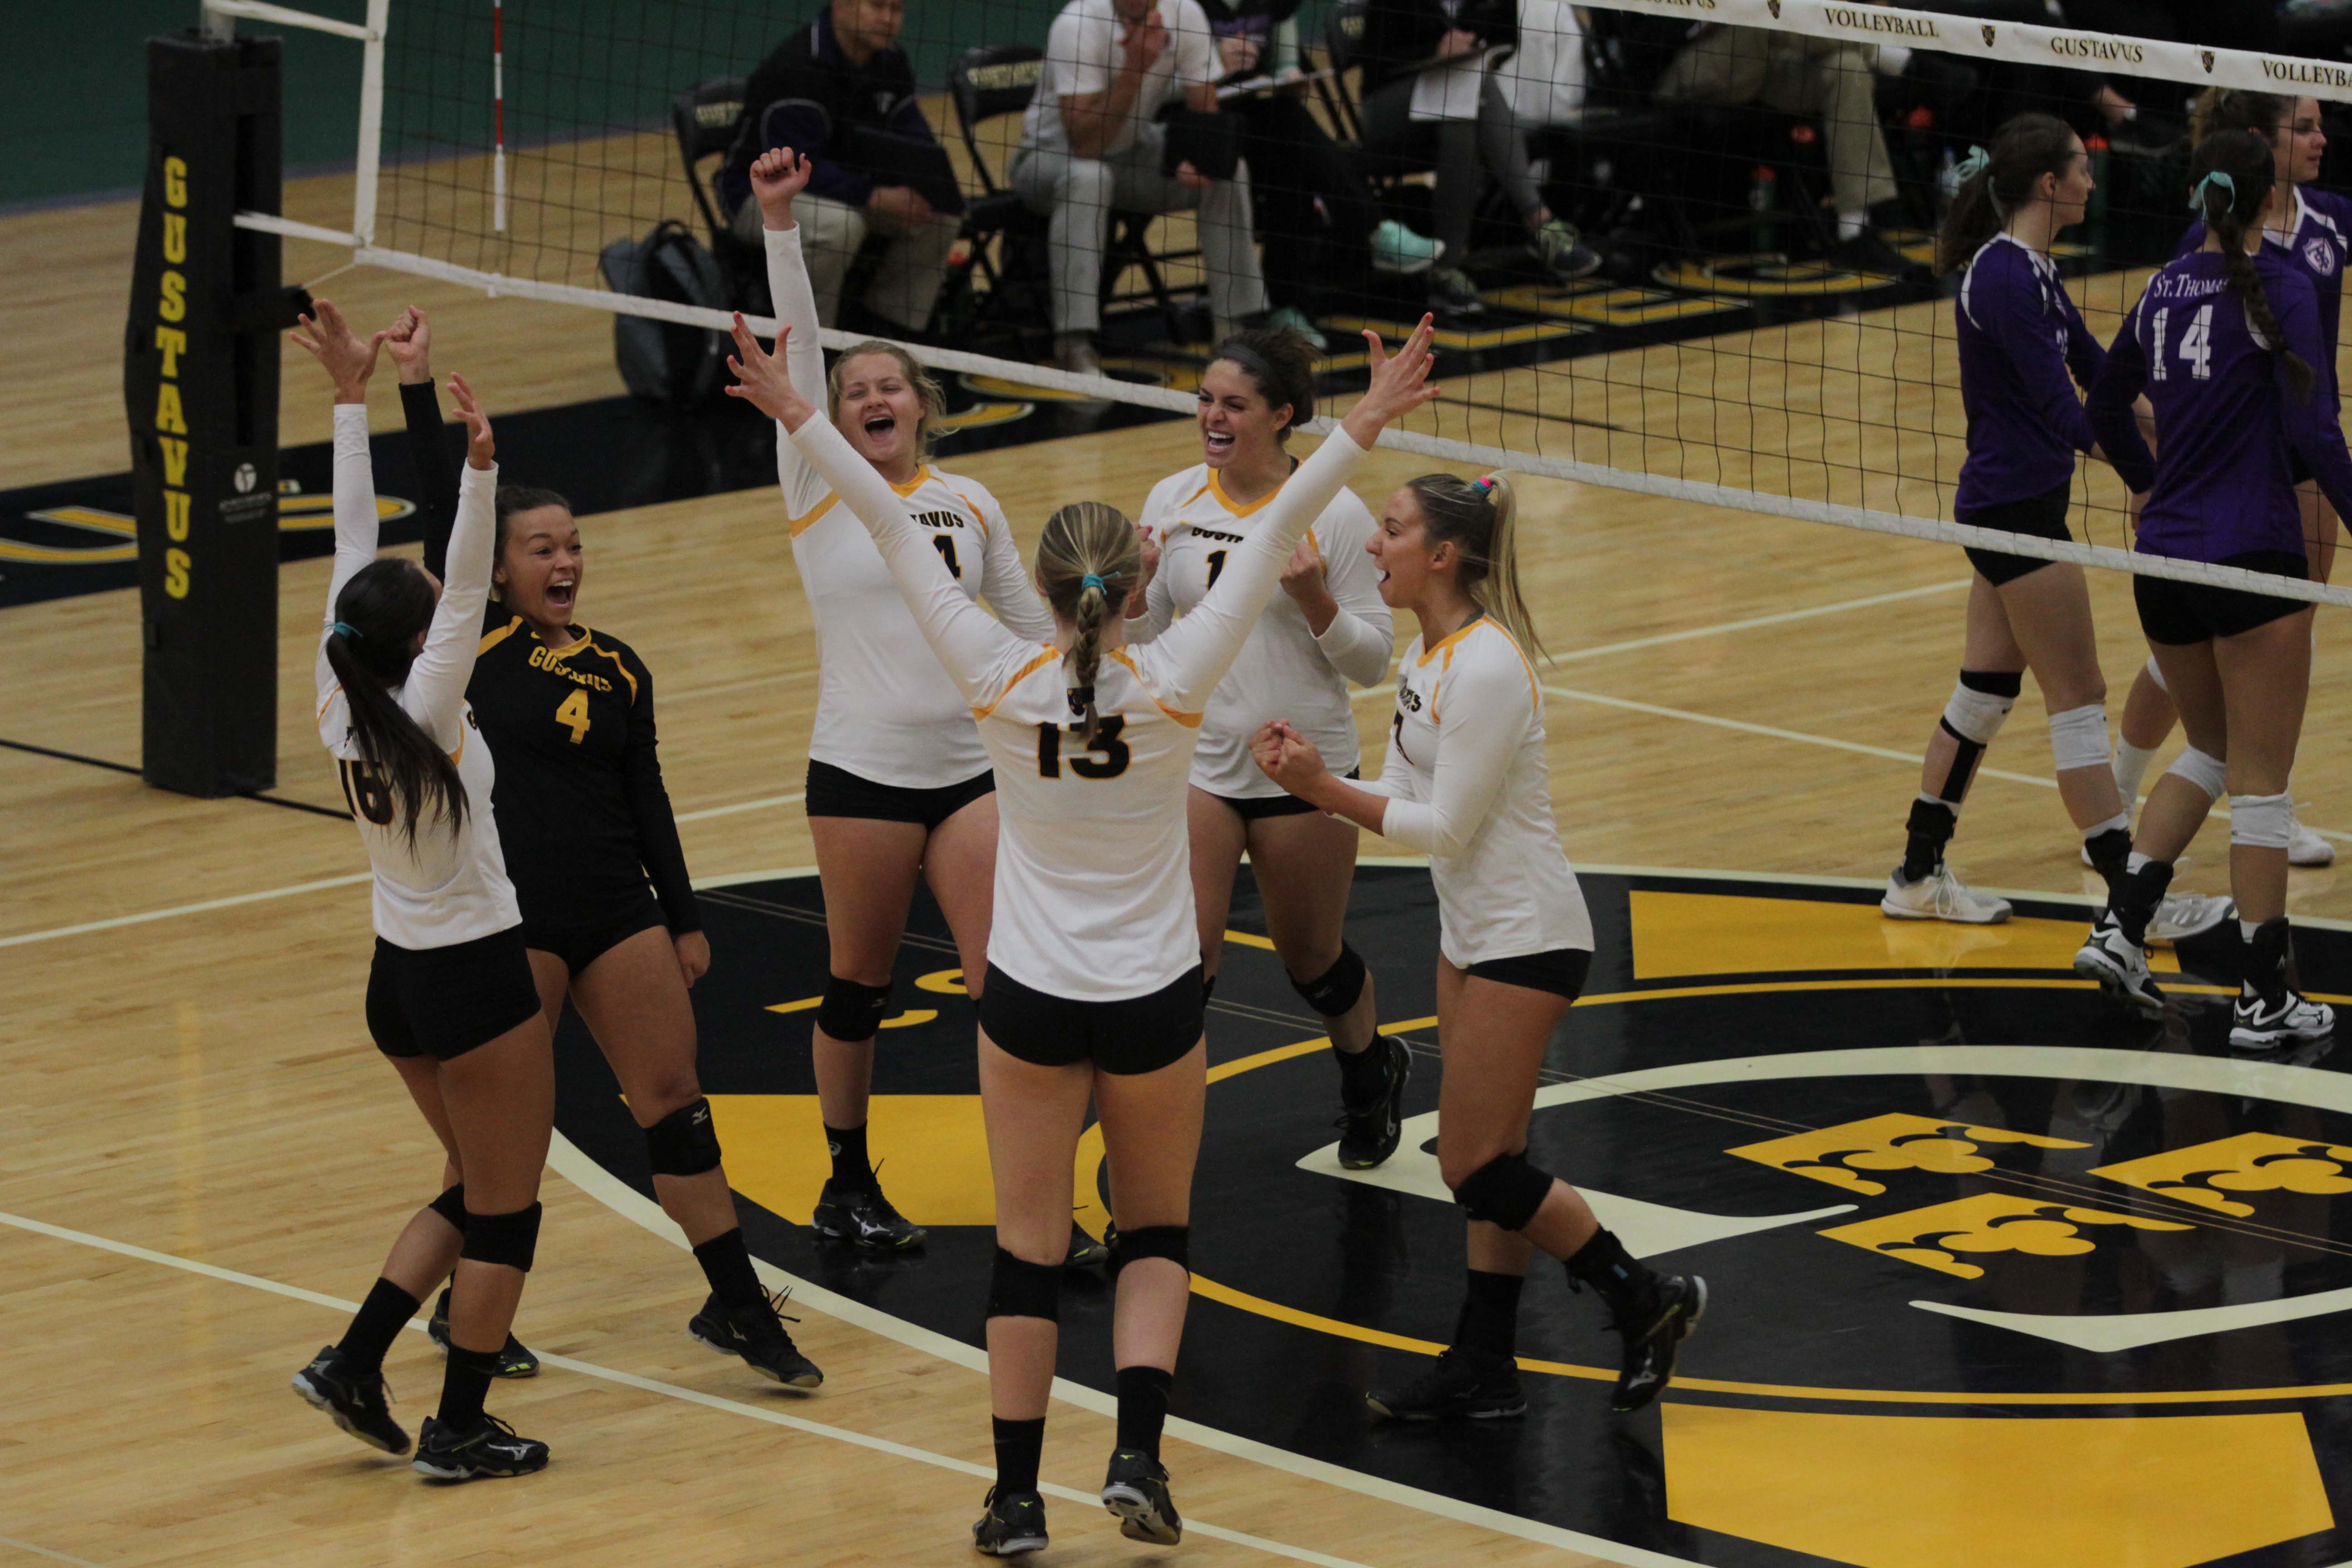 The Gustavus Women's Volleyball team celebrates on the court.